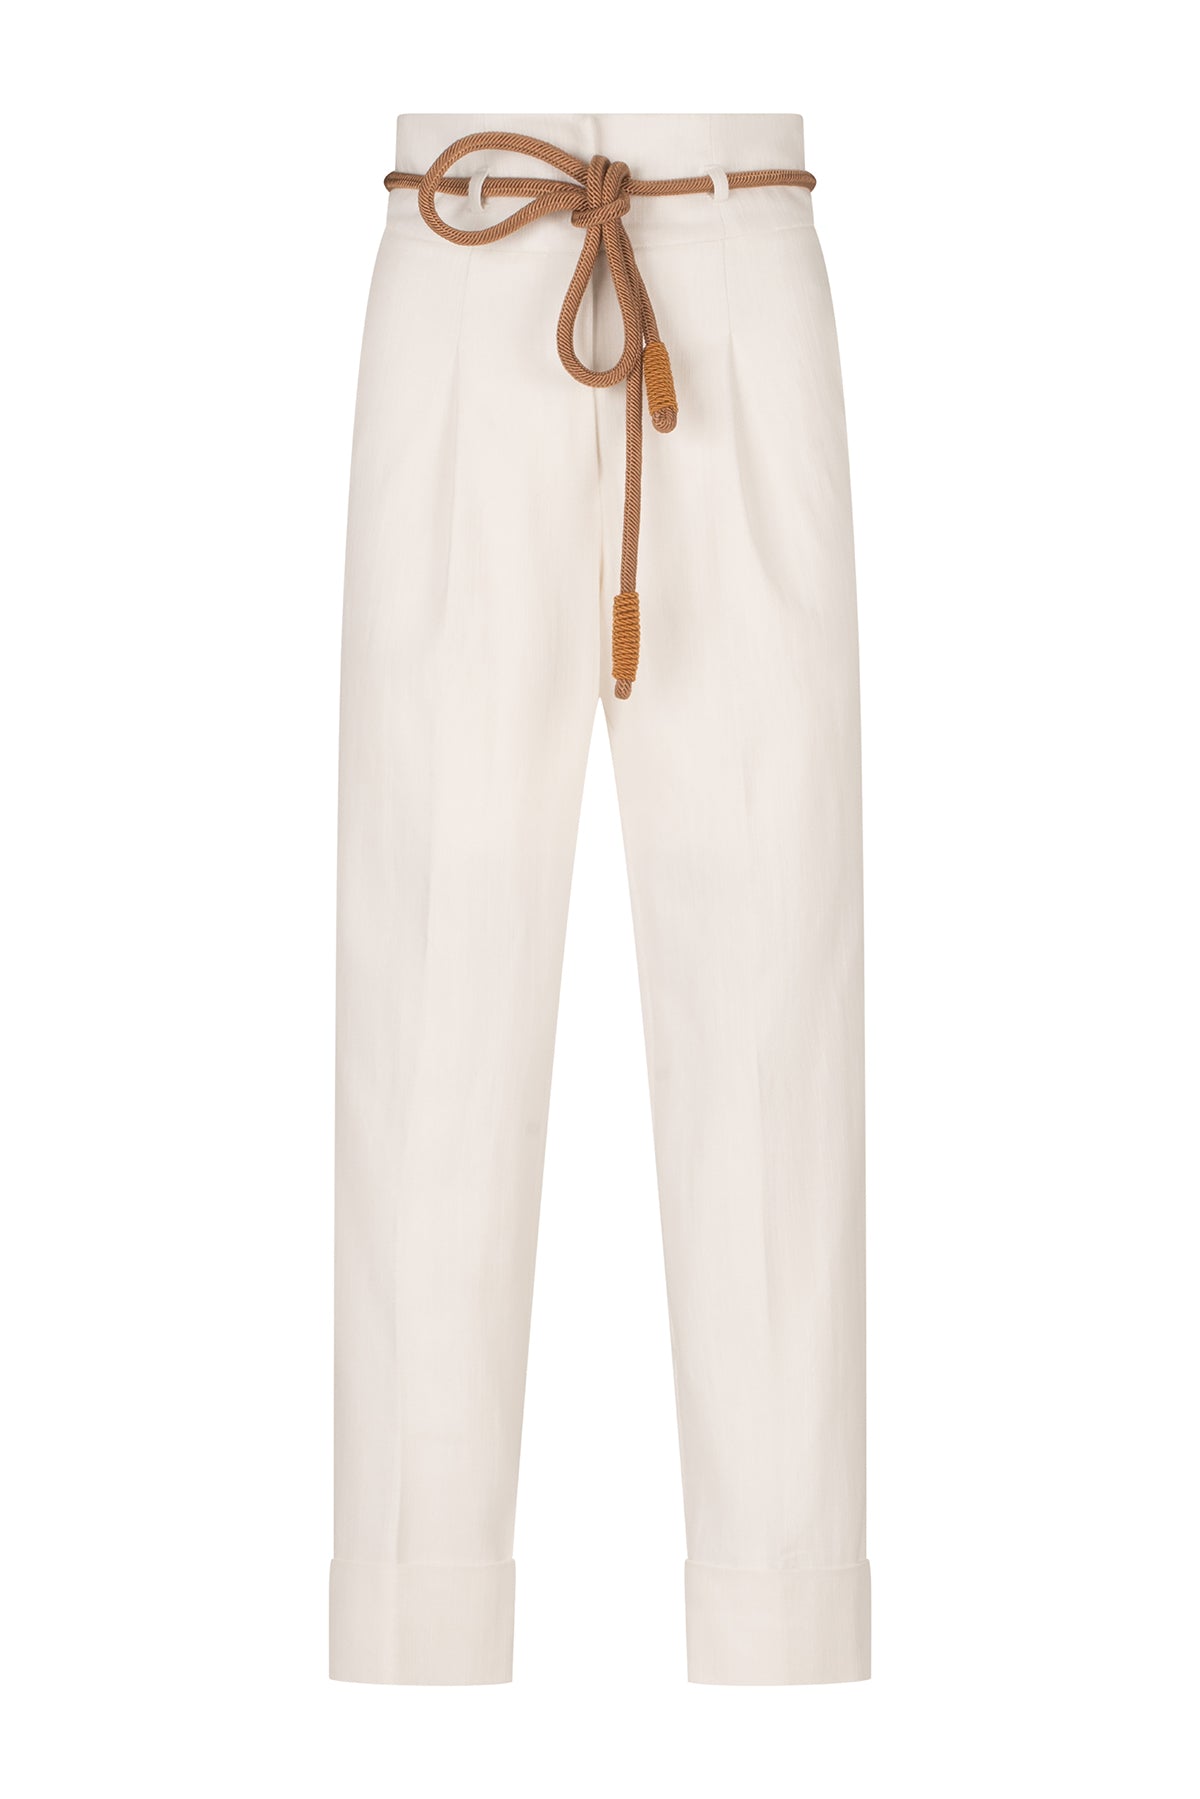 Beryl Pant White paired with a brown belt.